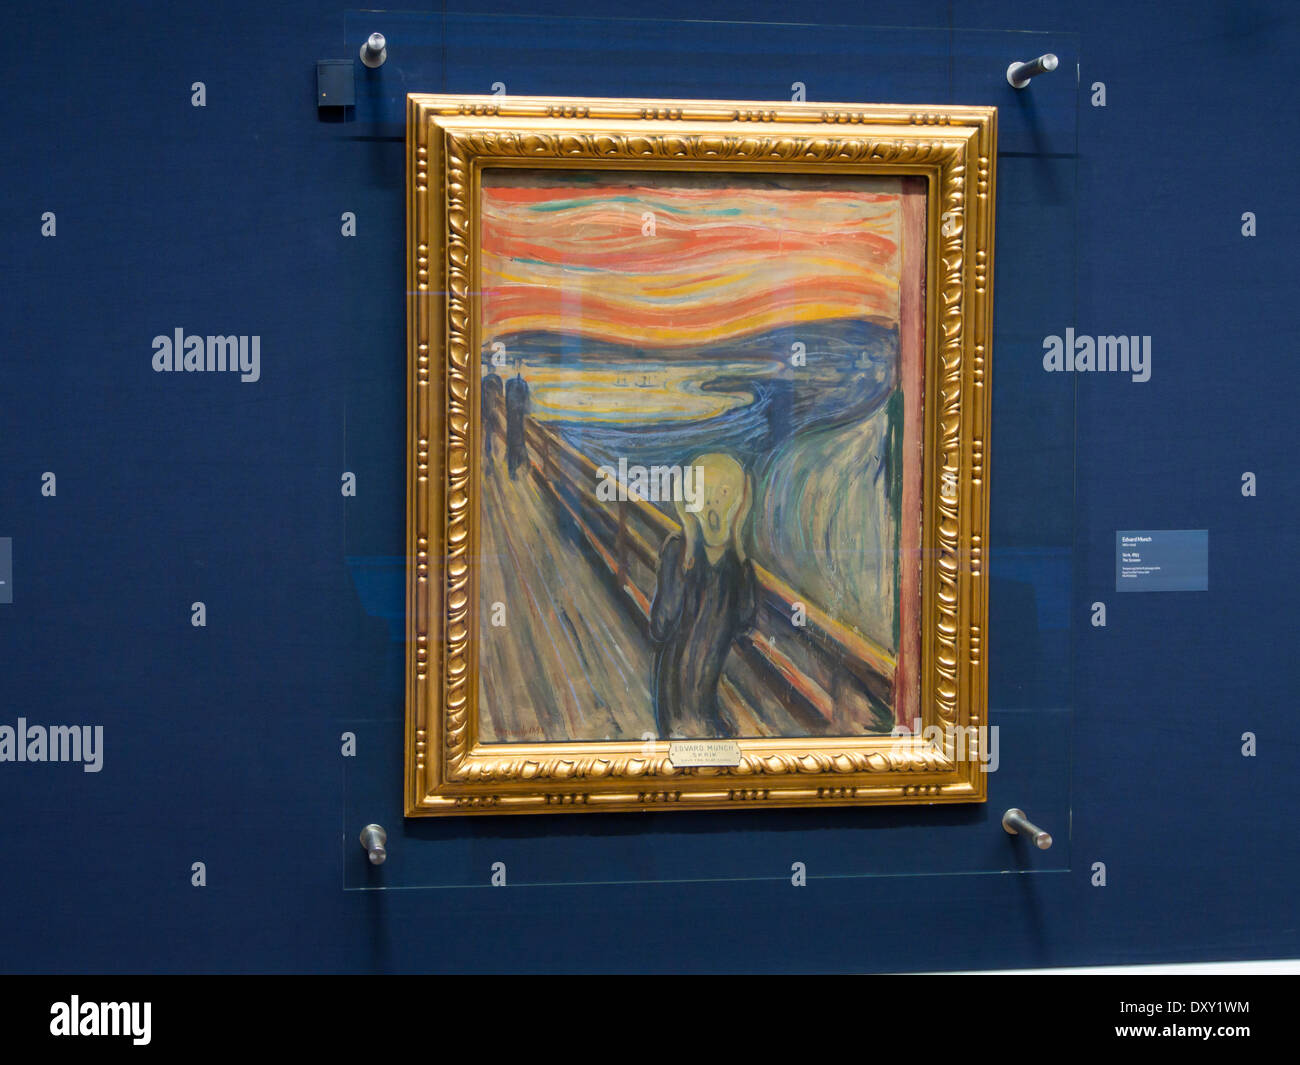 The Norwegian National museum and  gallery in Oslo Norway, painting by Edvard Munch 'Skriket' the scream behind protective glass Stock Photo